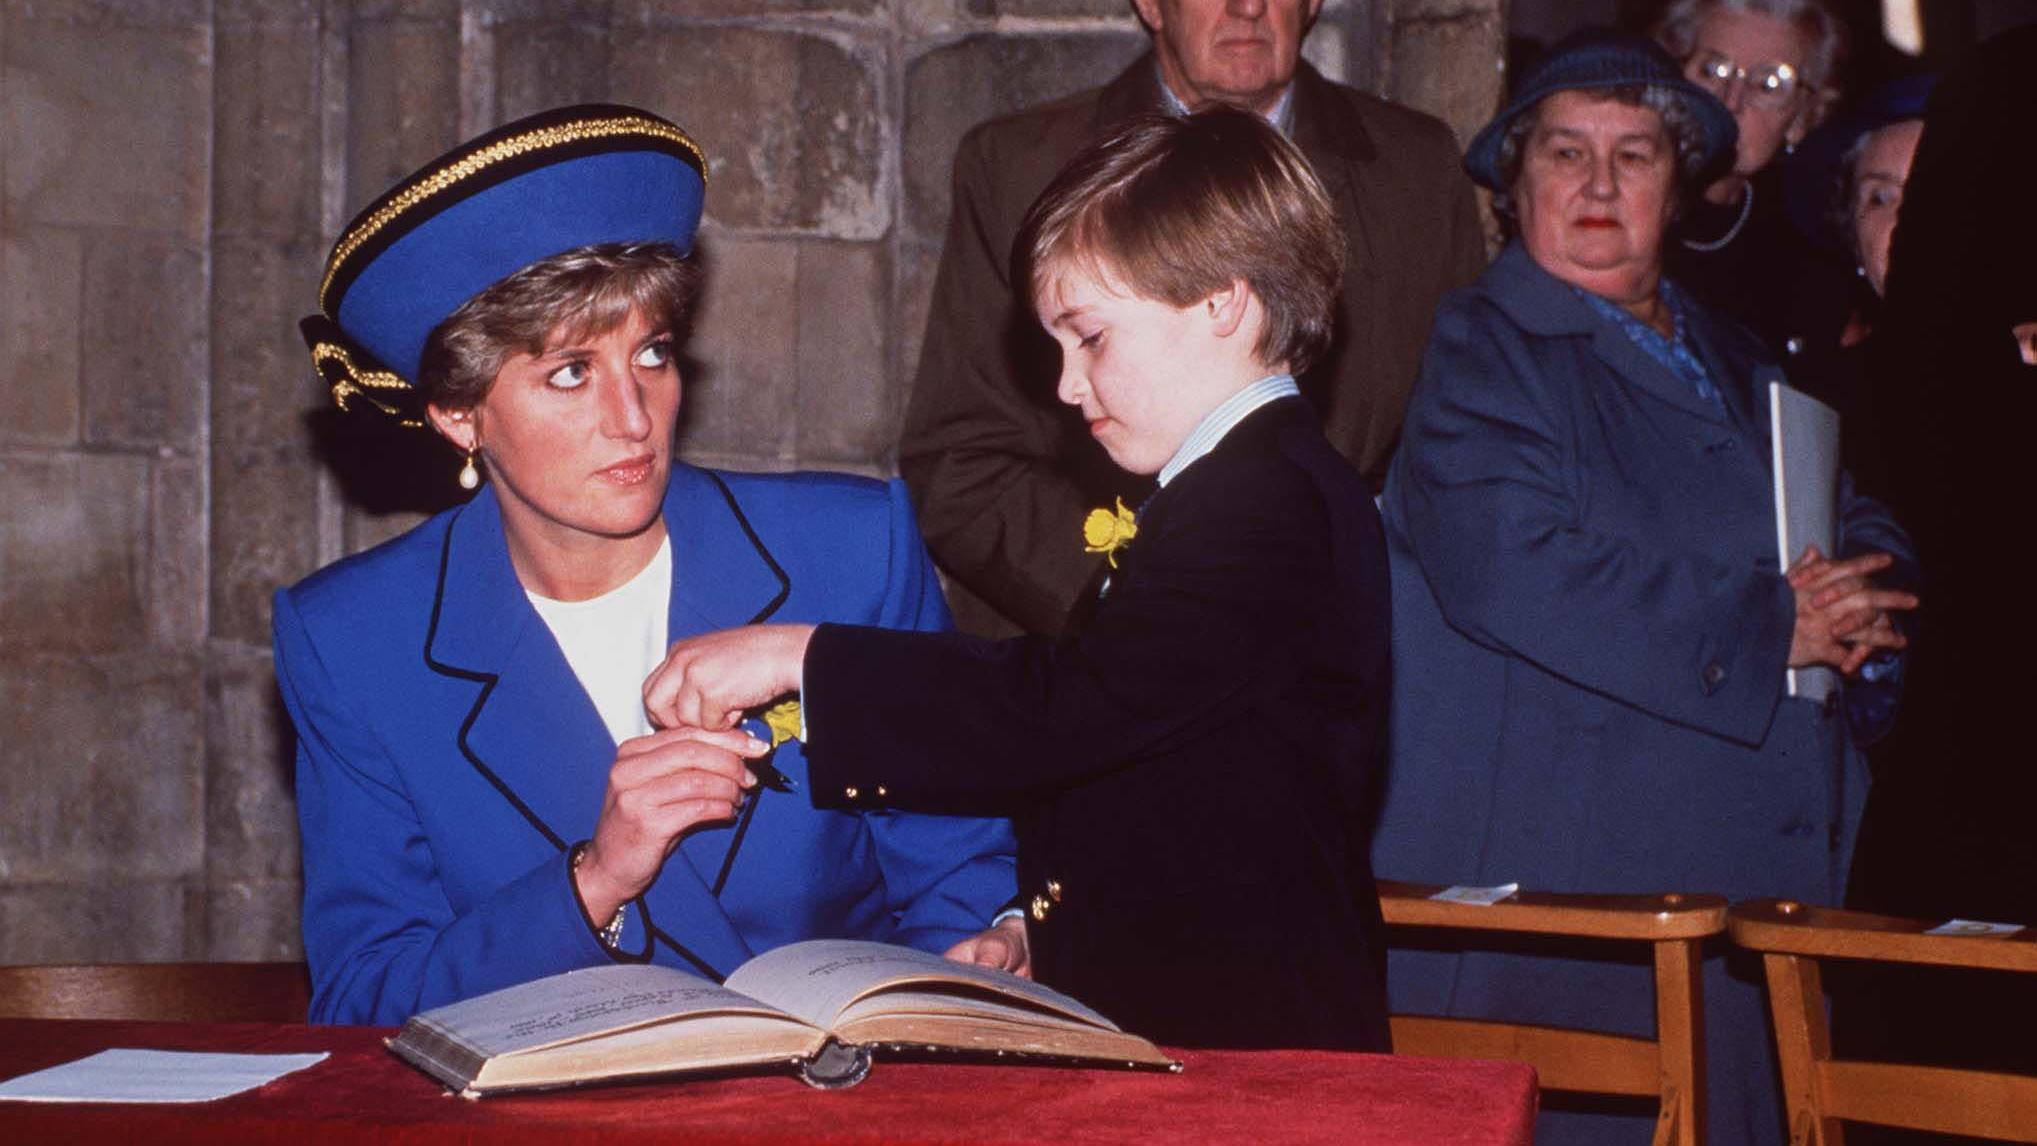 HRH PRINCESS OF WALES With her son HRH PRINCE WILLIAM At Llandaff Cathedral, Cardiff during Prince William's first official Royal engagement